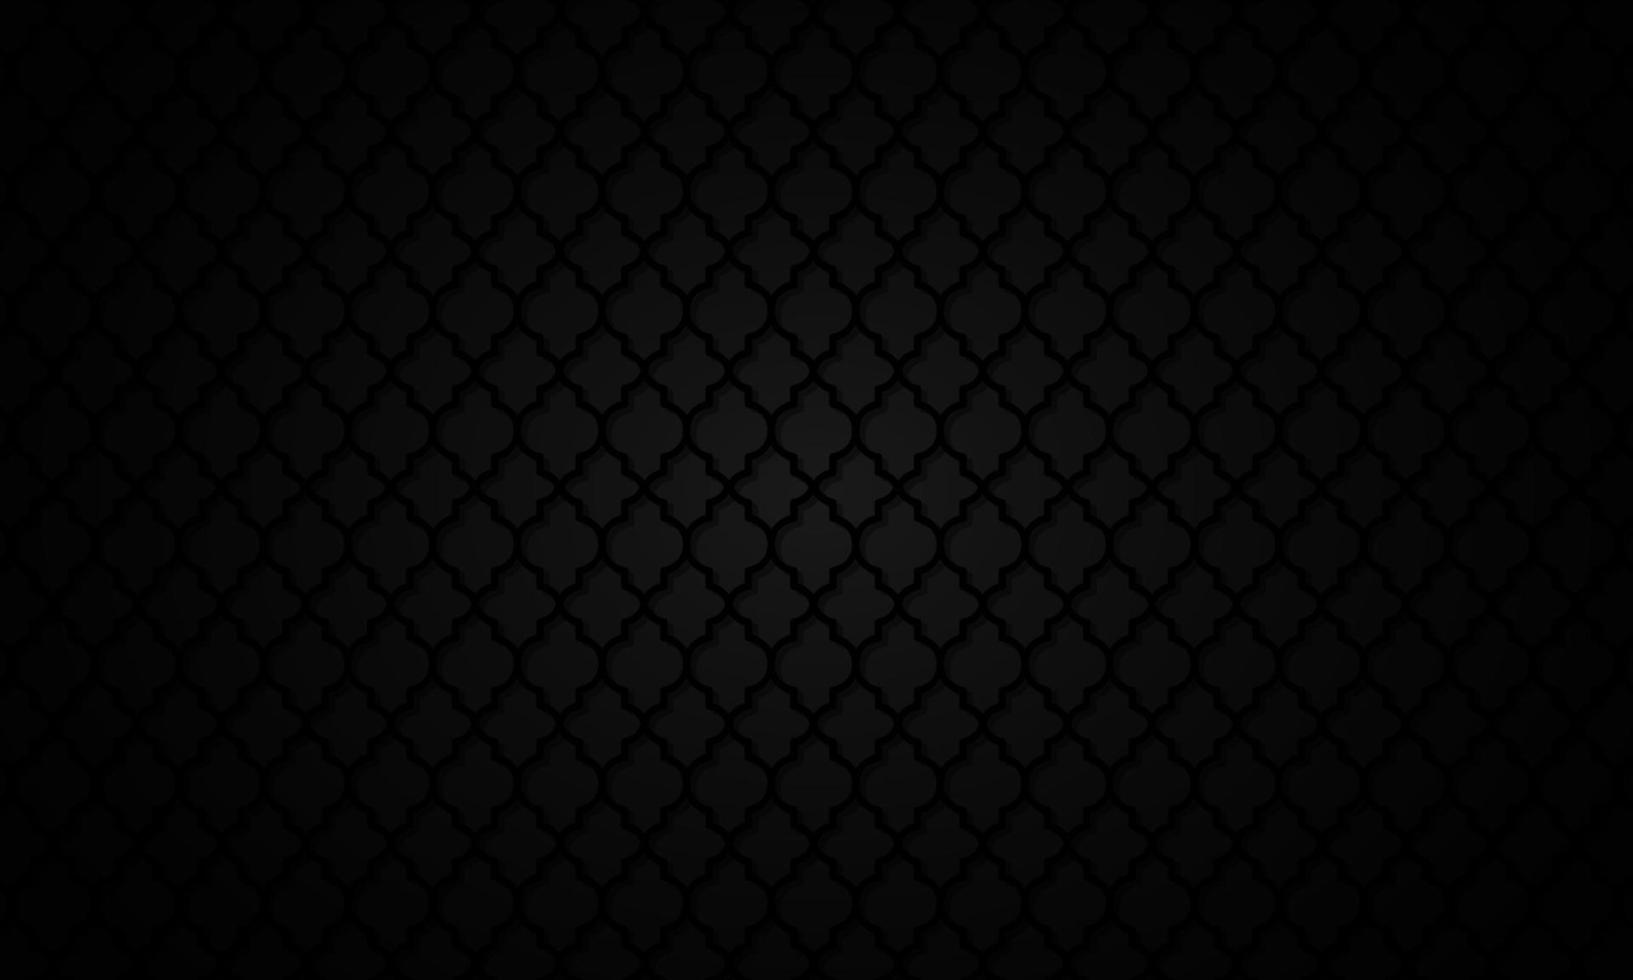 Abstract black background vector design, banner pattern, background template. Suitable for various background design, template, banner, poster, presentation, etc.